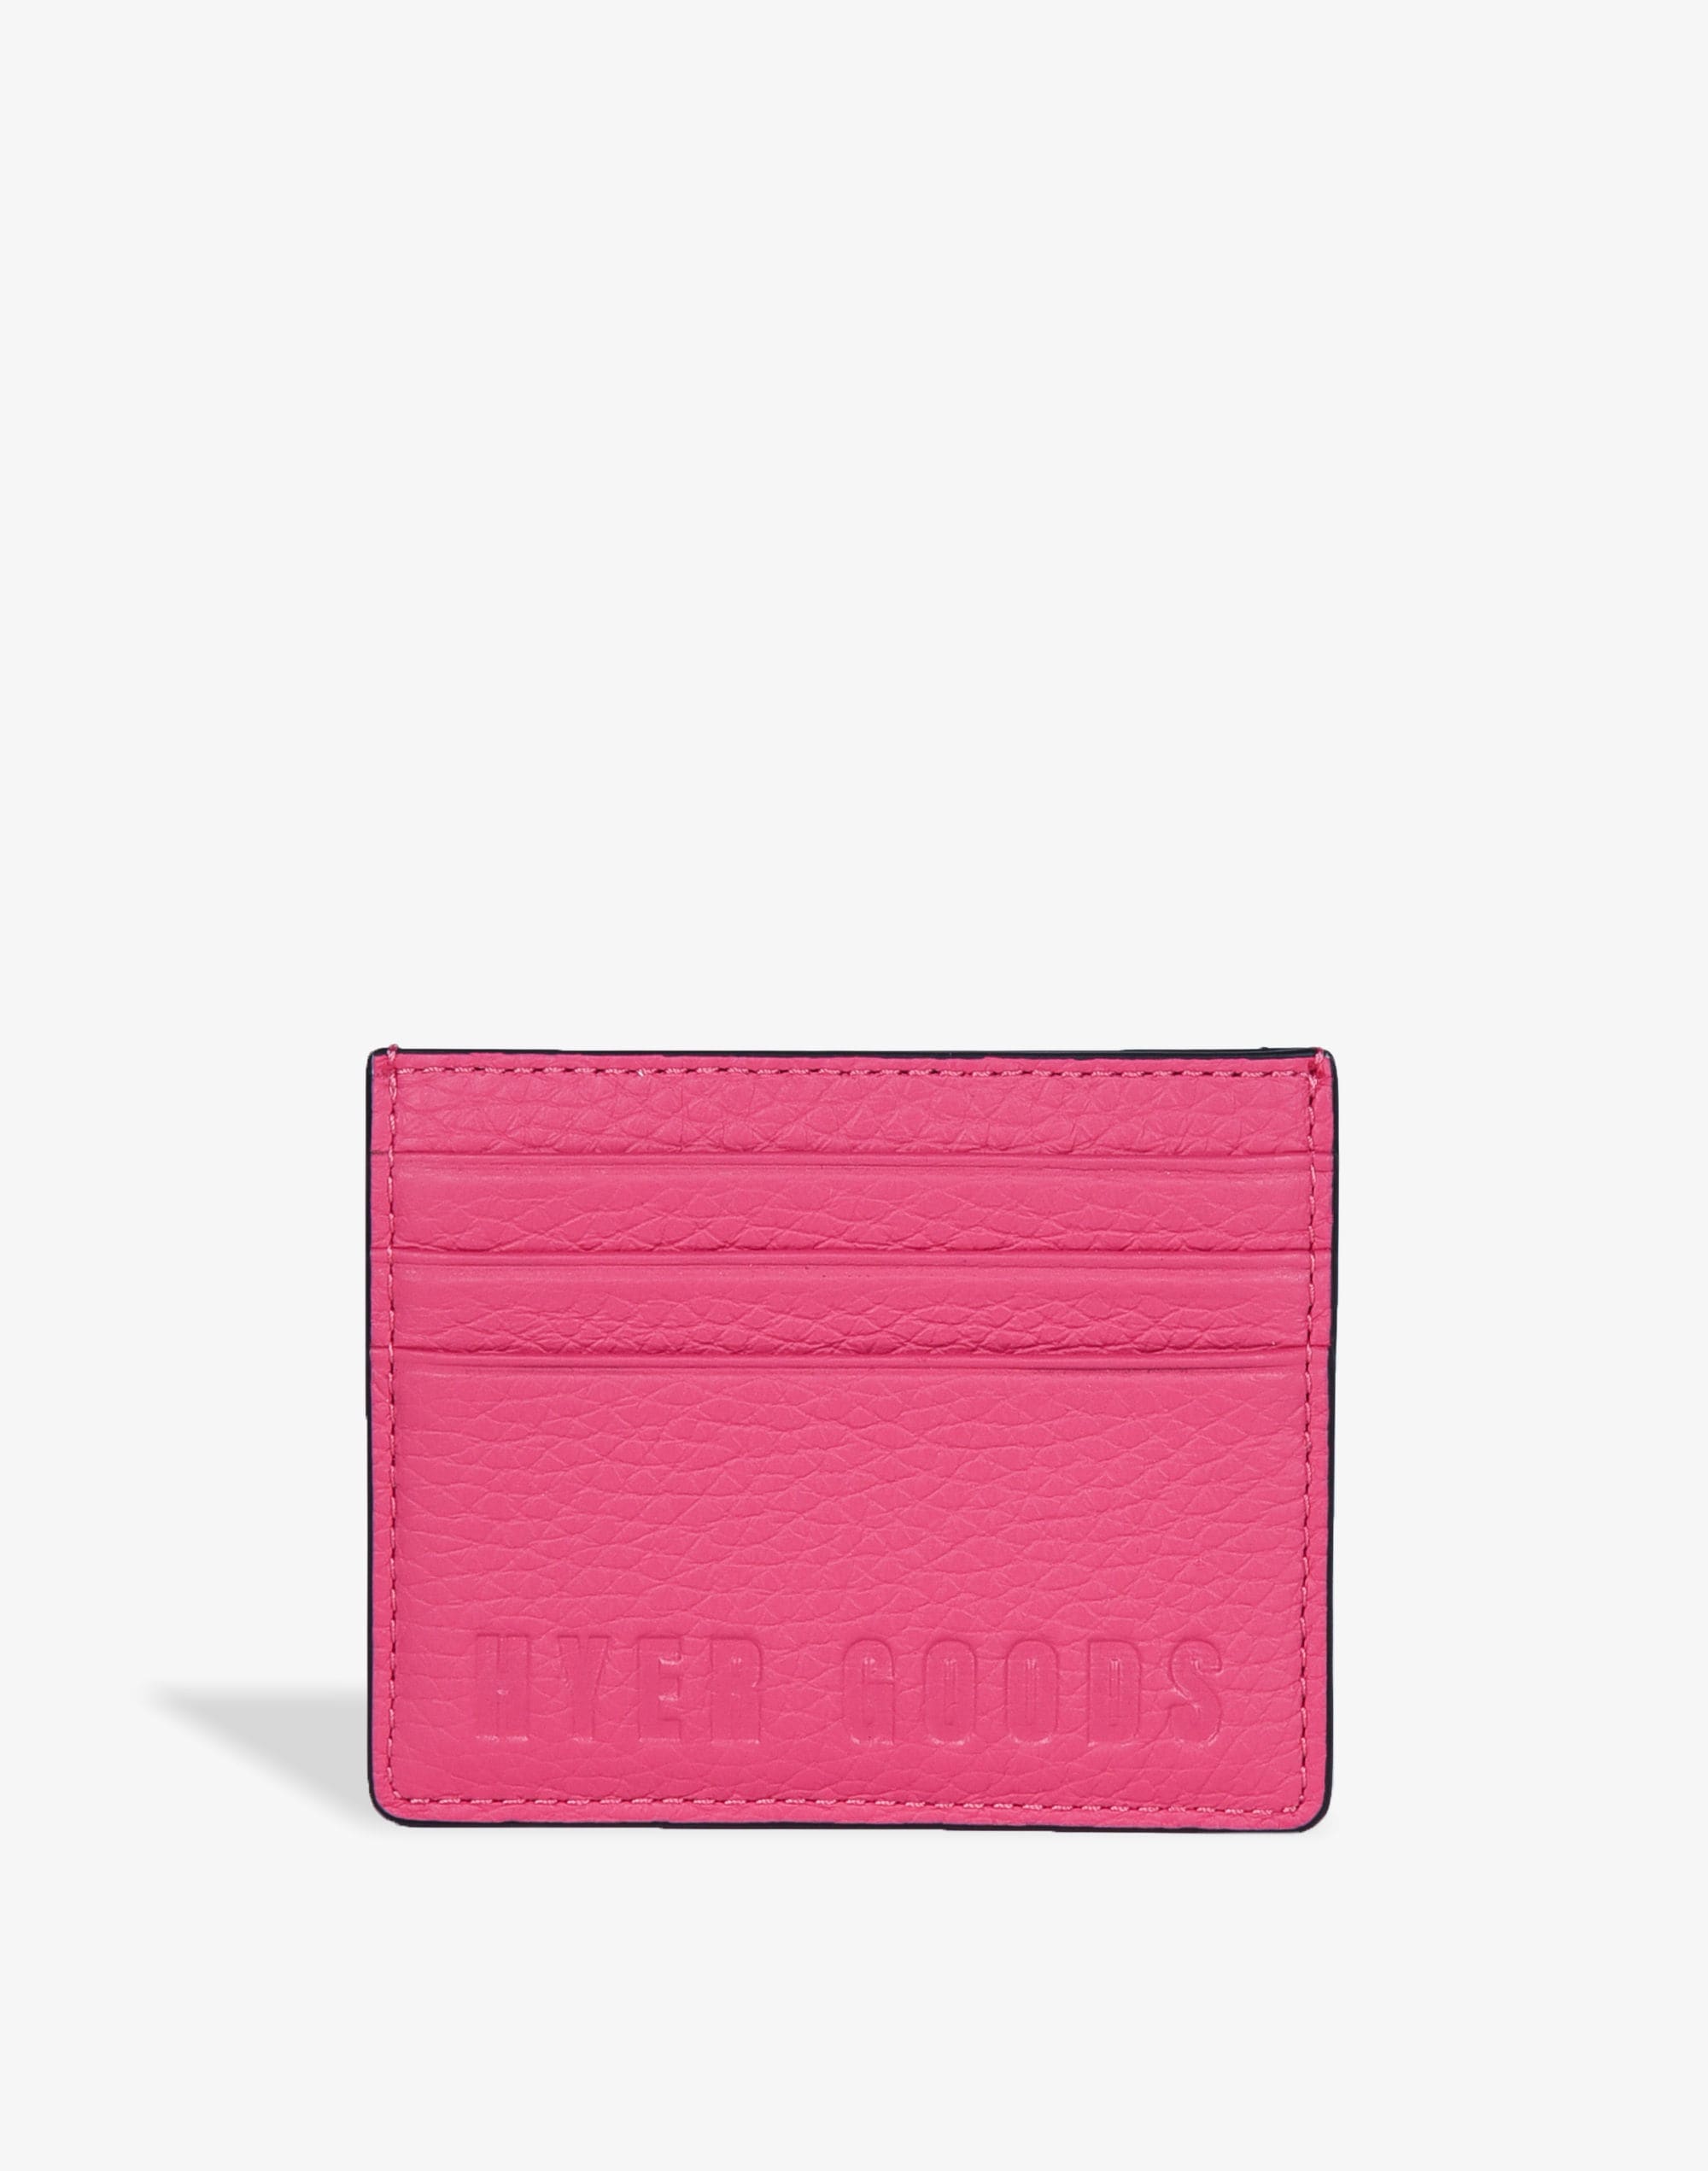 Mw Hyer Goods Luxe Card Wallet In Fuchsia